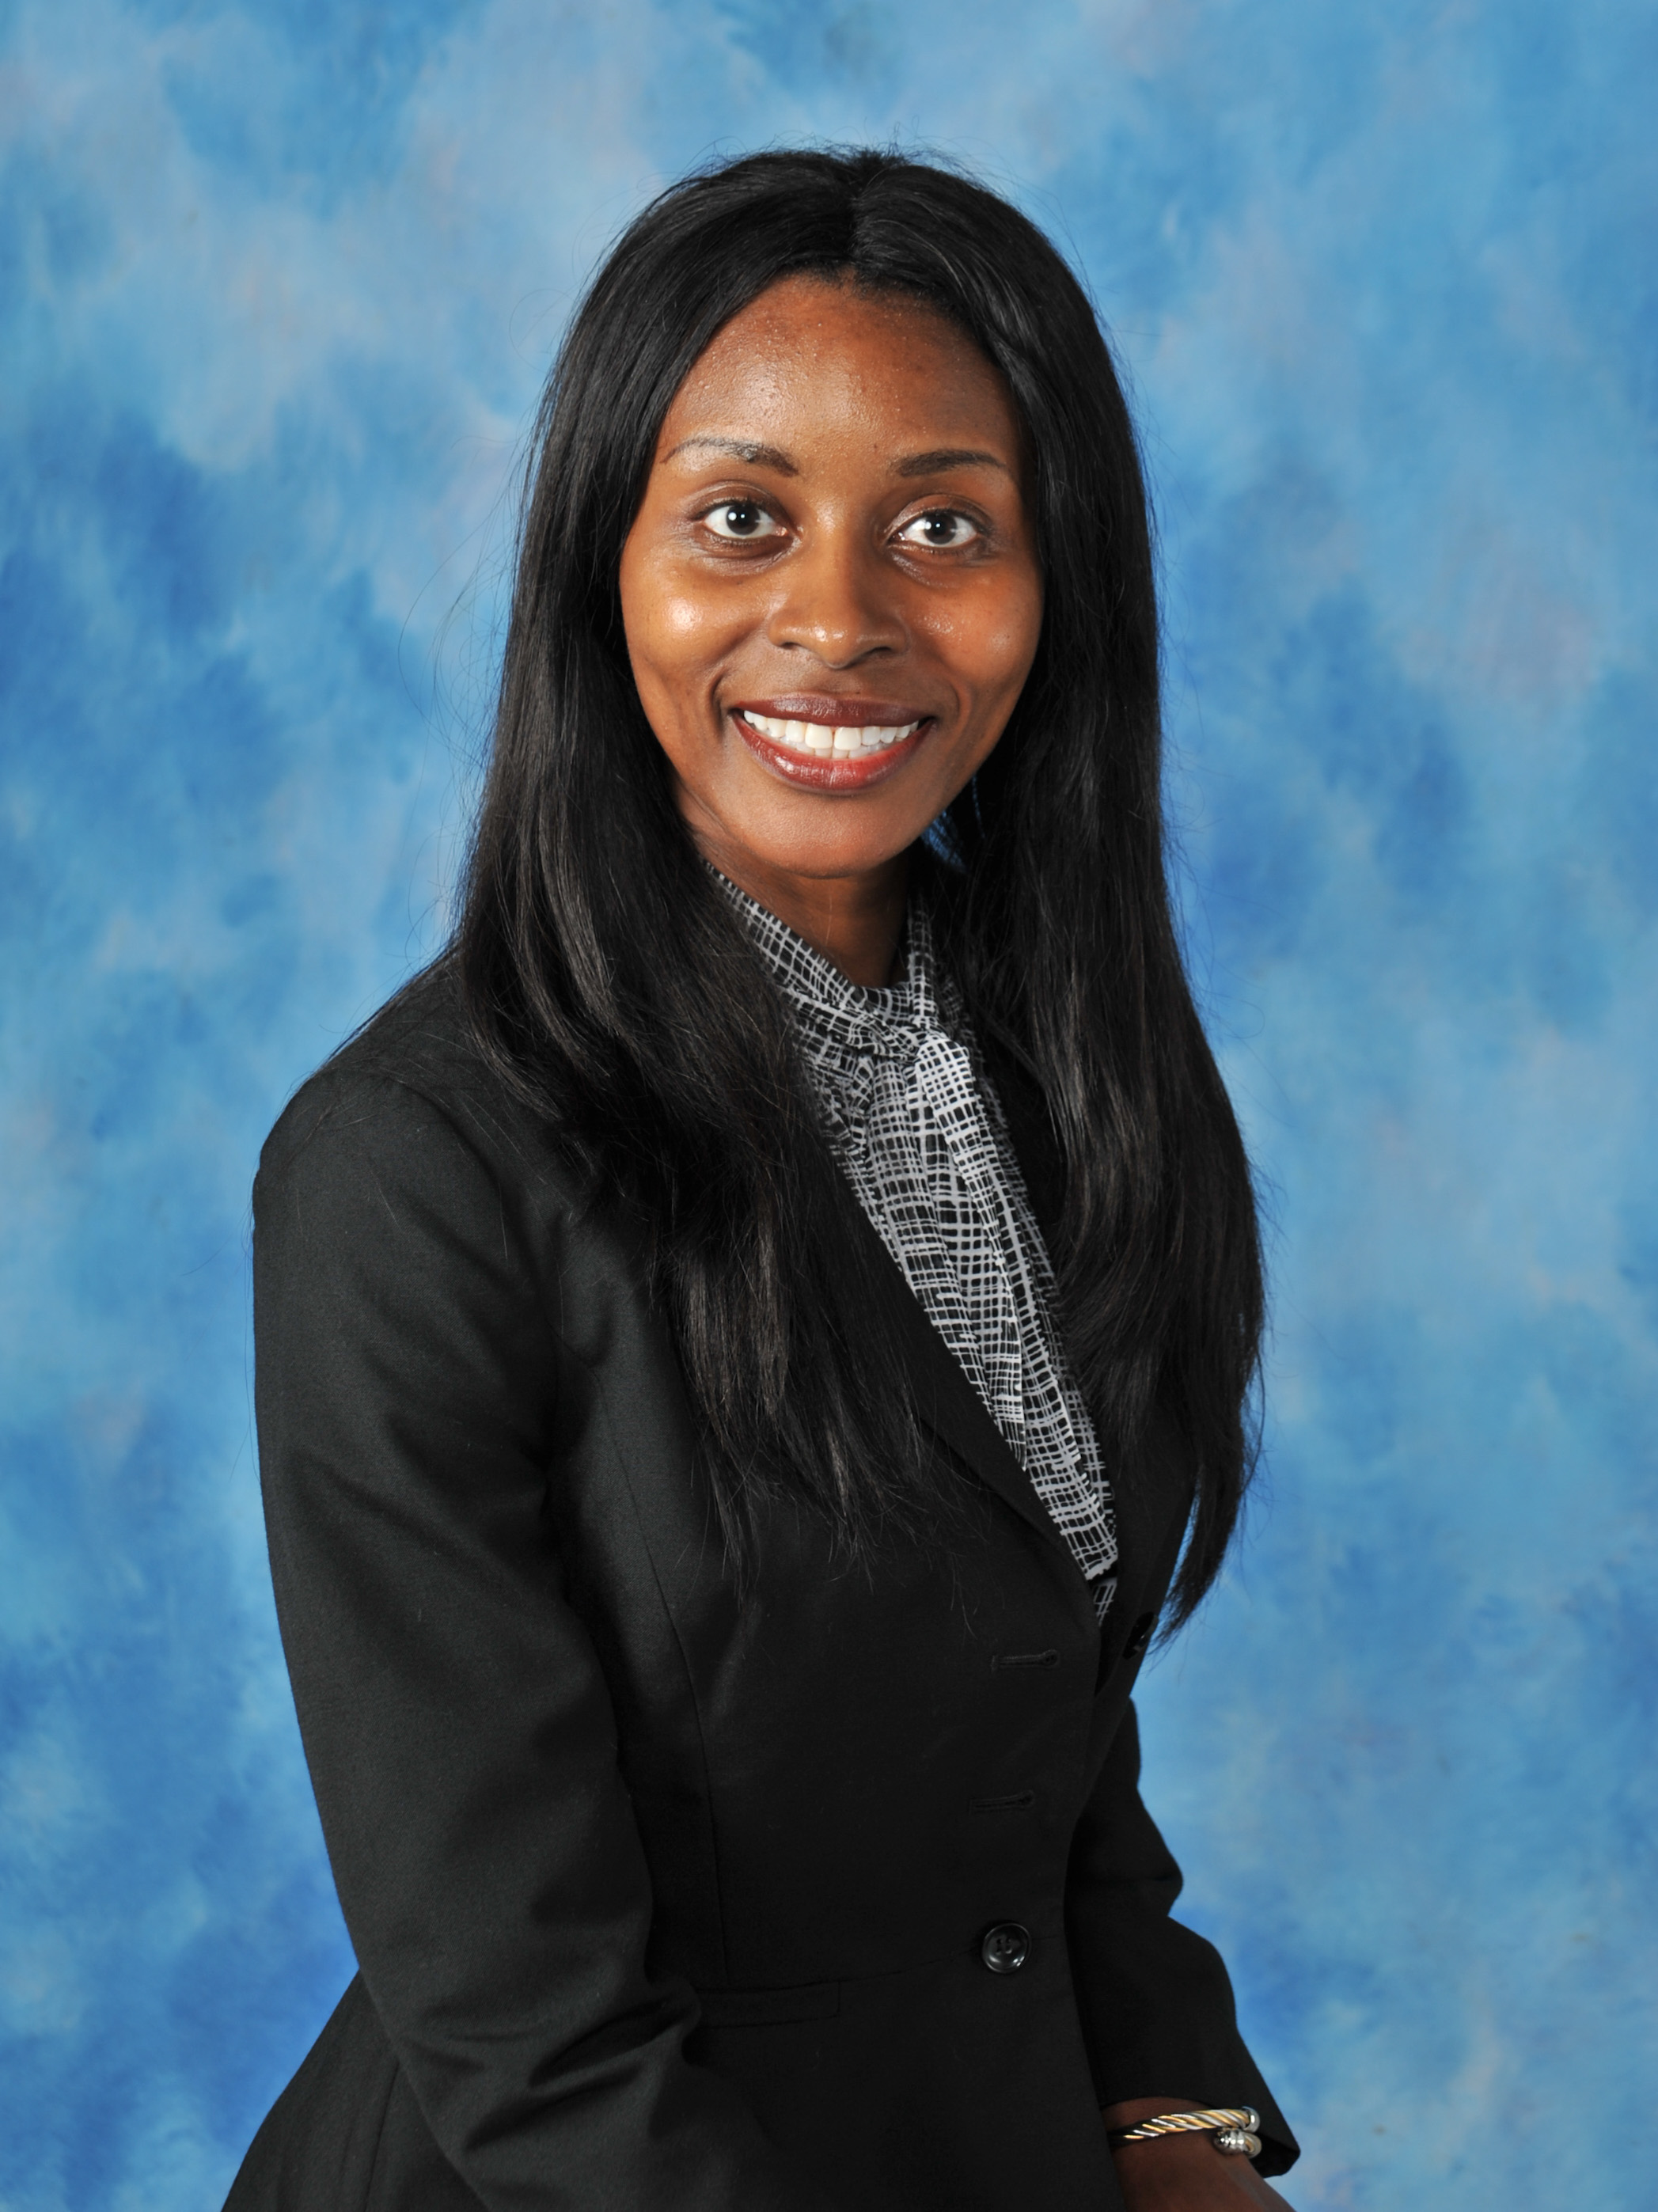 Dr. Helen-Valentine Chukwu is an associate medical director at Memorial Primary Care, part of the Memorial Healthcare System.